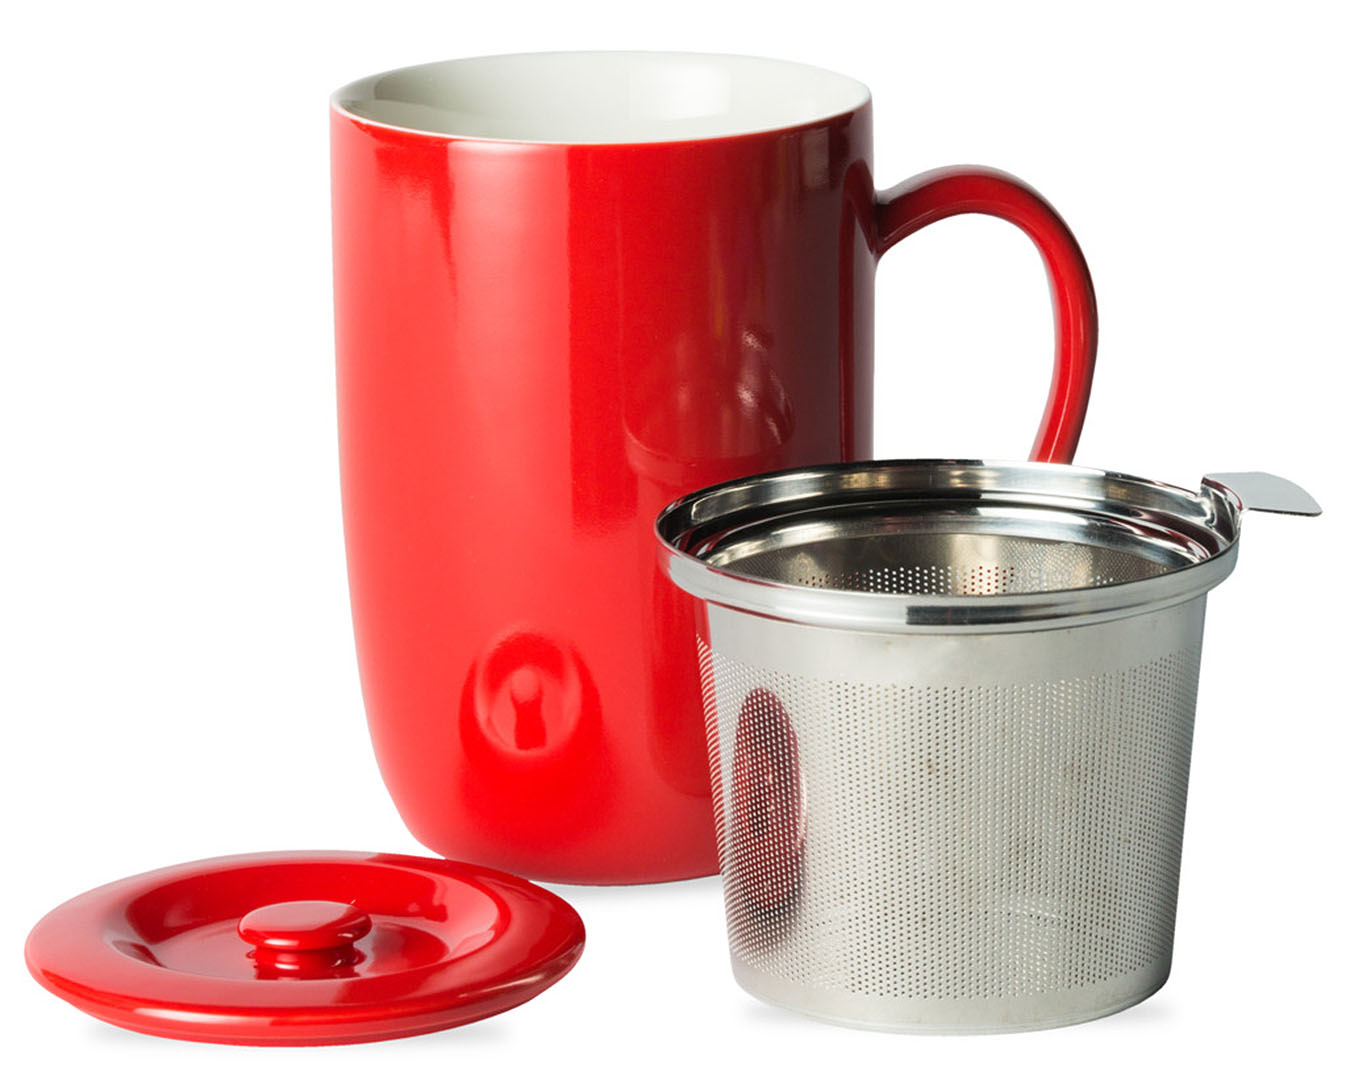 A cute T2 Red mug with infuser and lid.